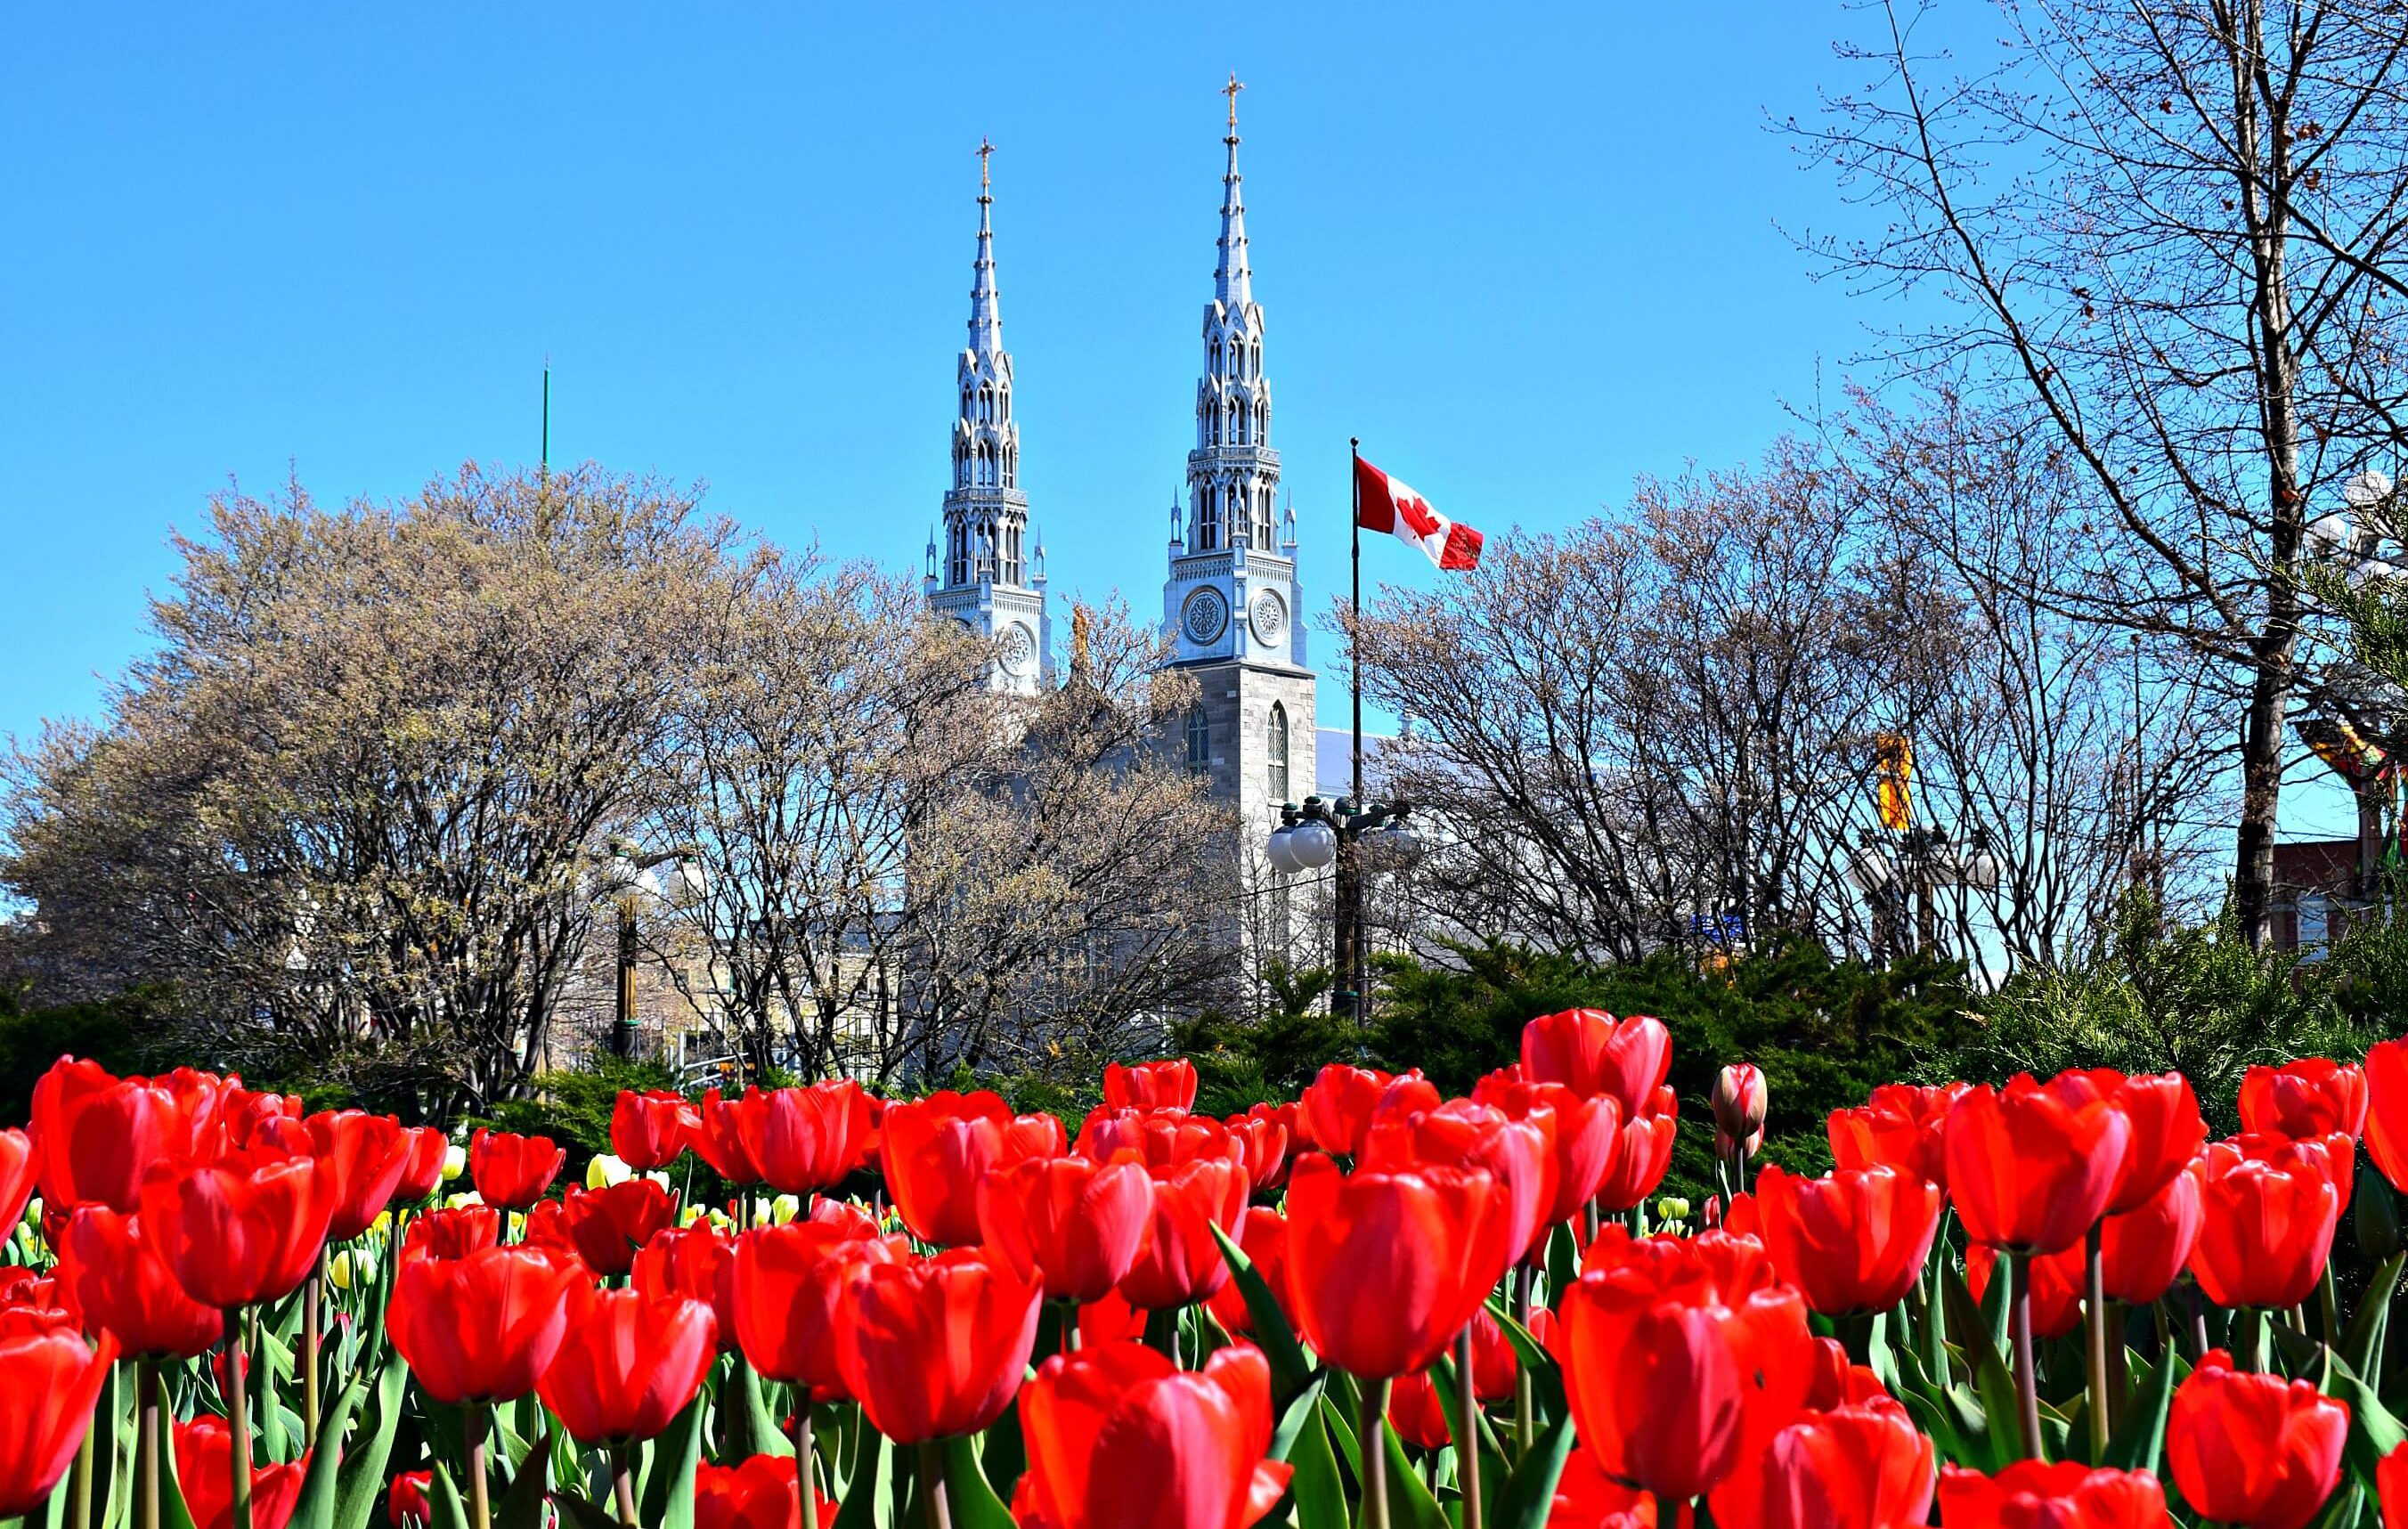 6 REASONS TO VISIT THE CANADIAN TULIP FESTIVAL IN OTTAWA - Travel ...